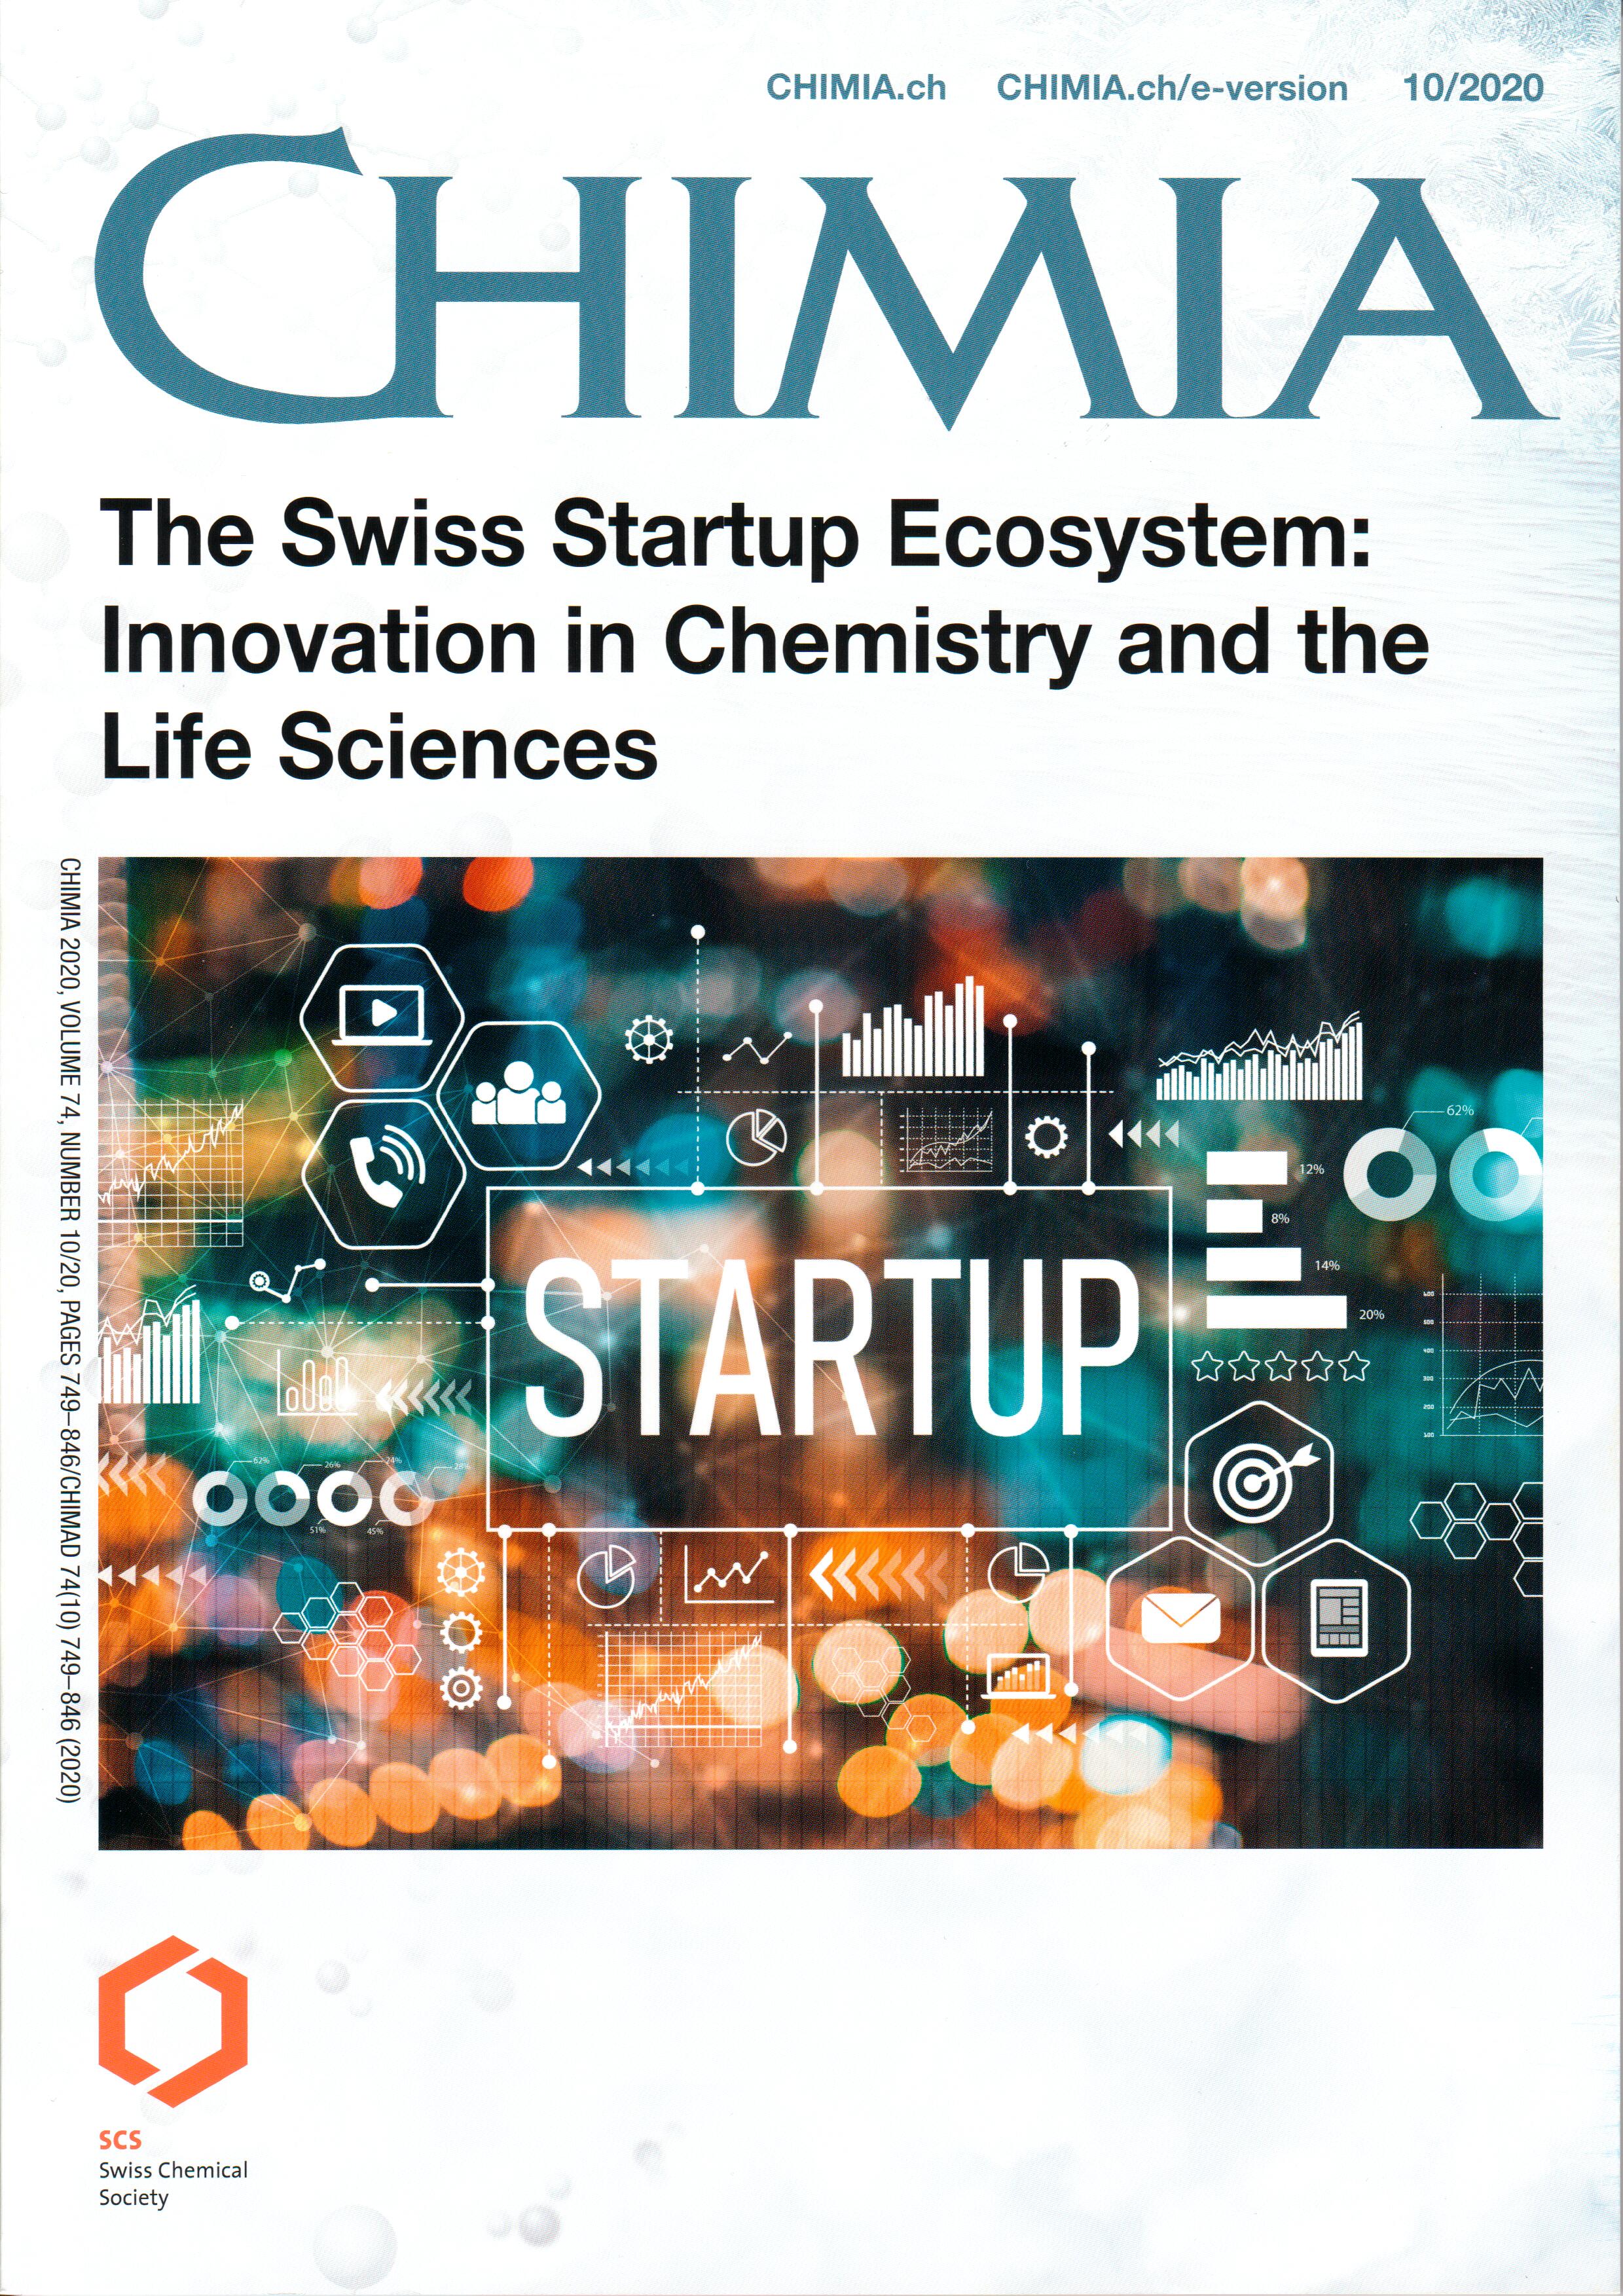 CHIMIA - The Swiss Ecosystem: Innovation in Chemistry and Life Science